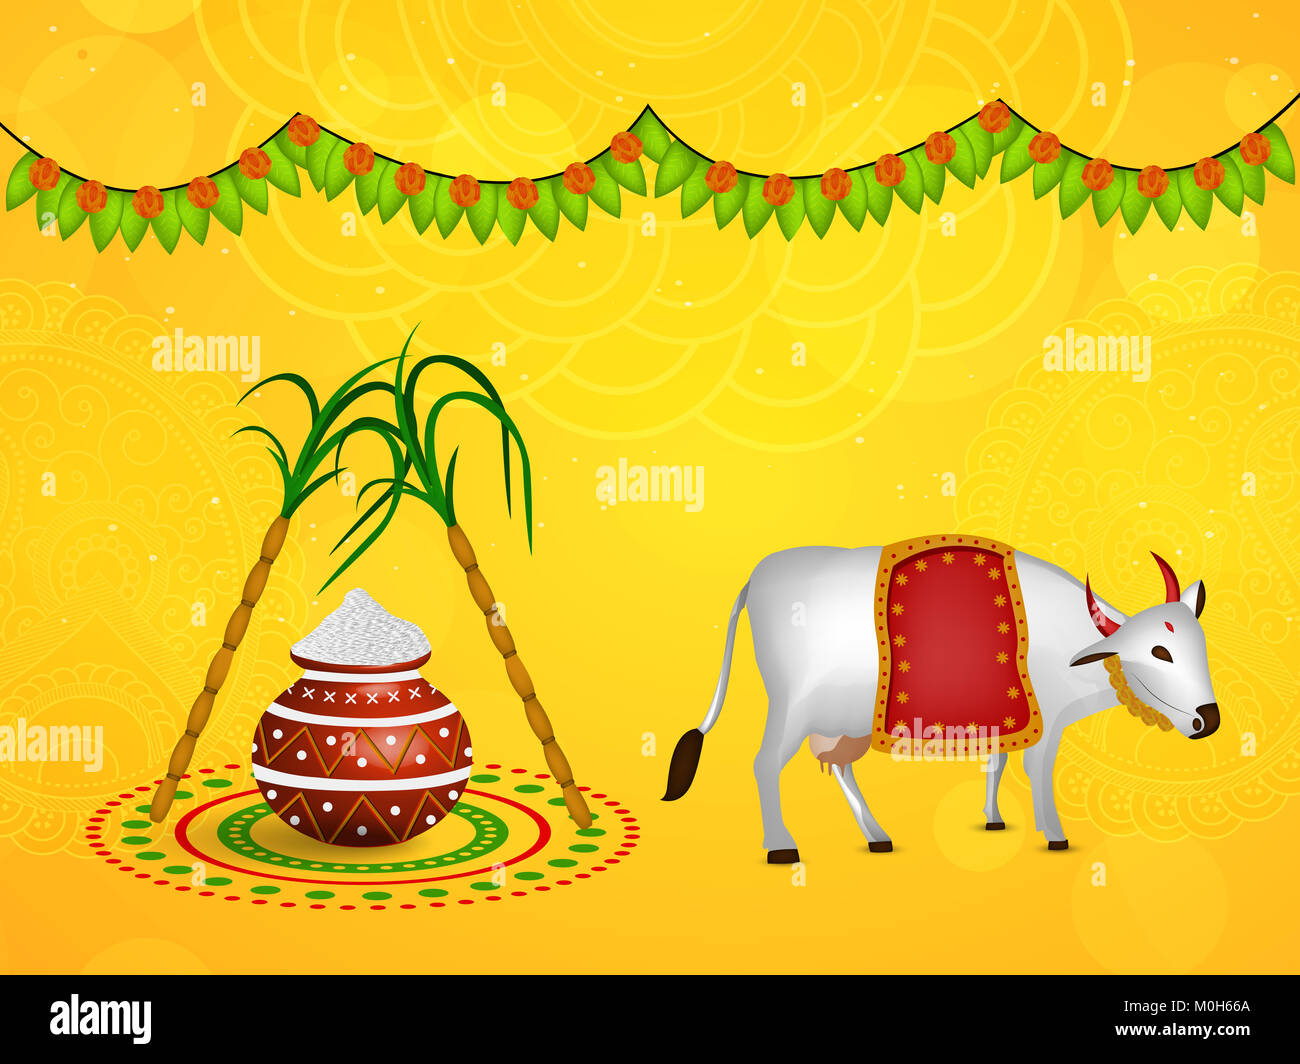 How to draw Pongal